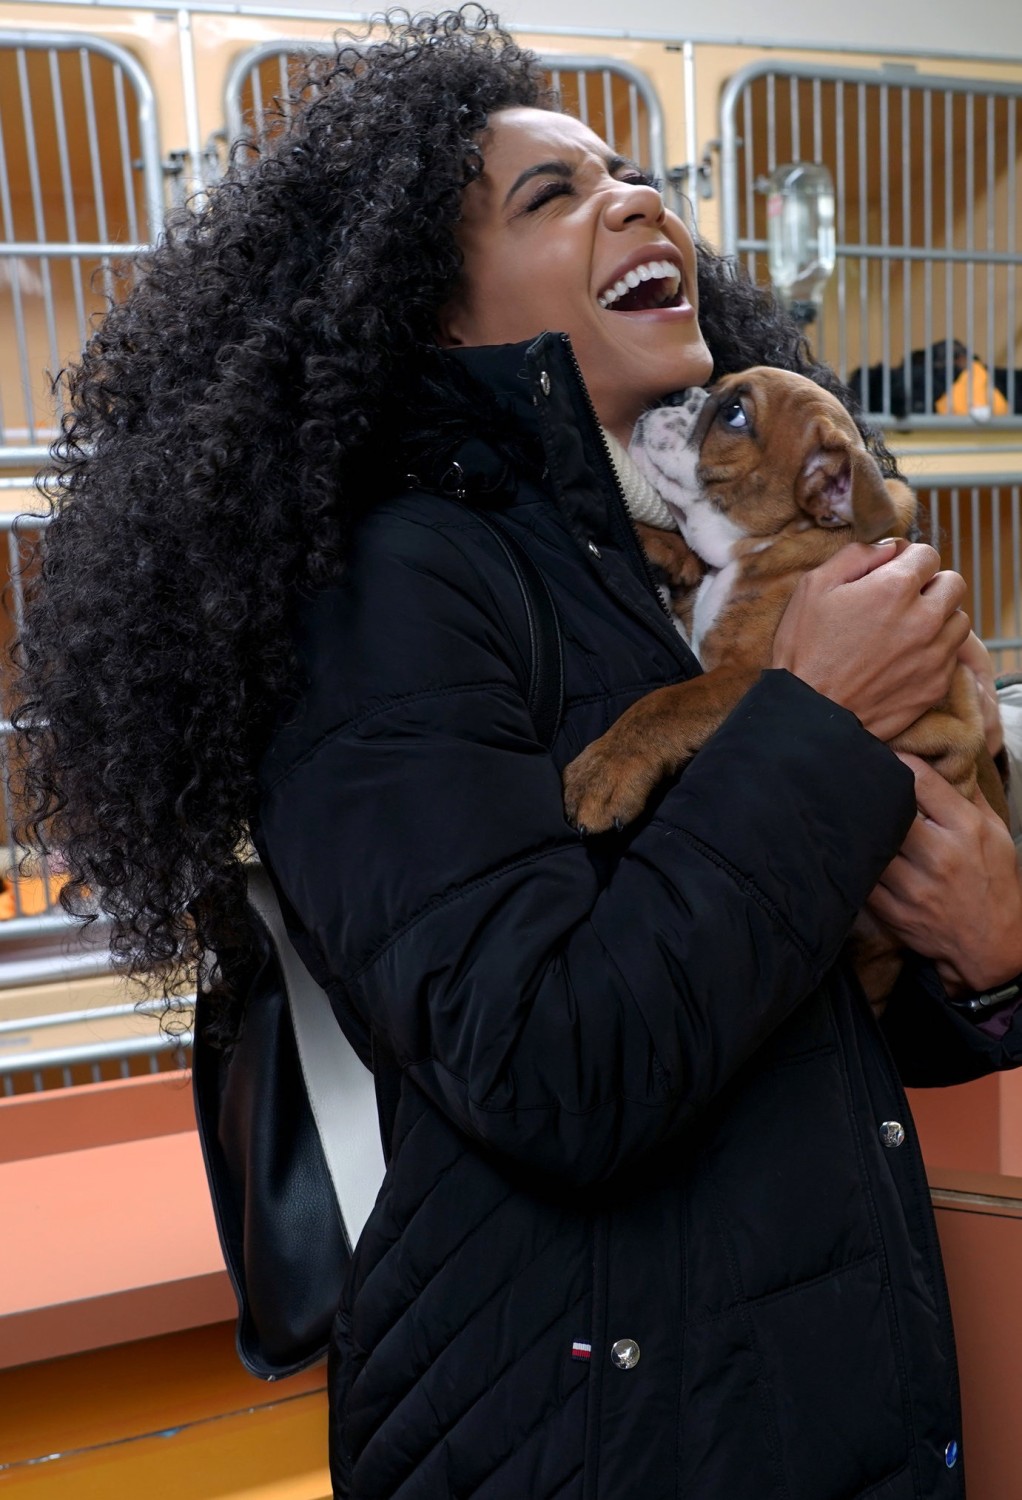 Cheslie Kryst laughing with a bulldog puppy